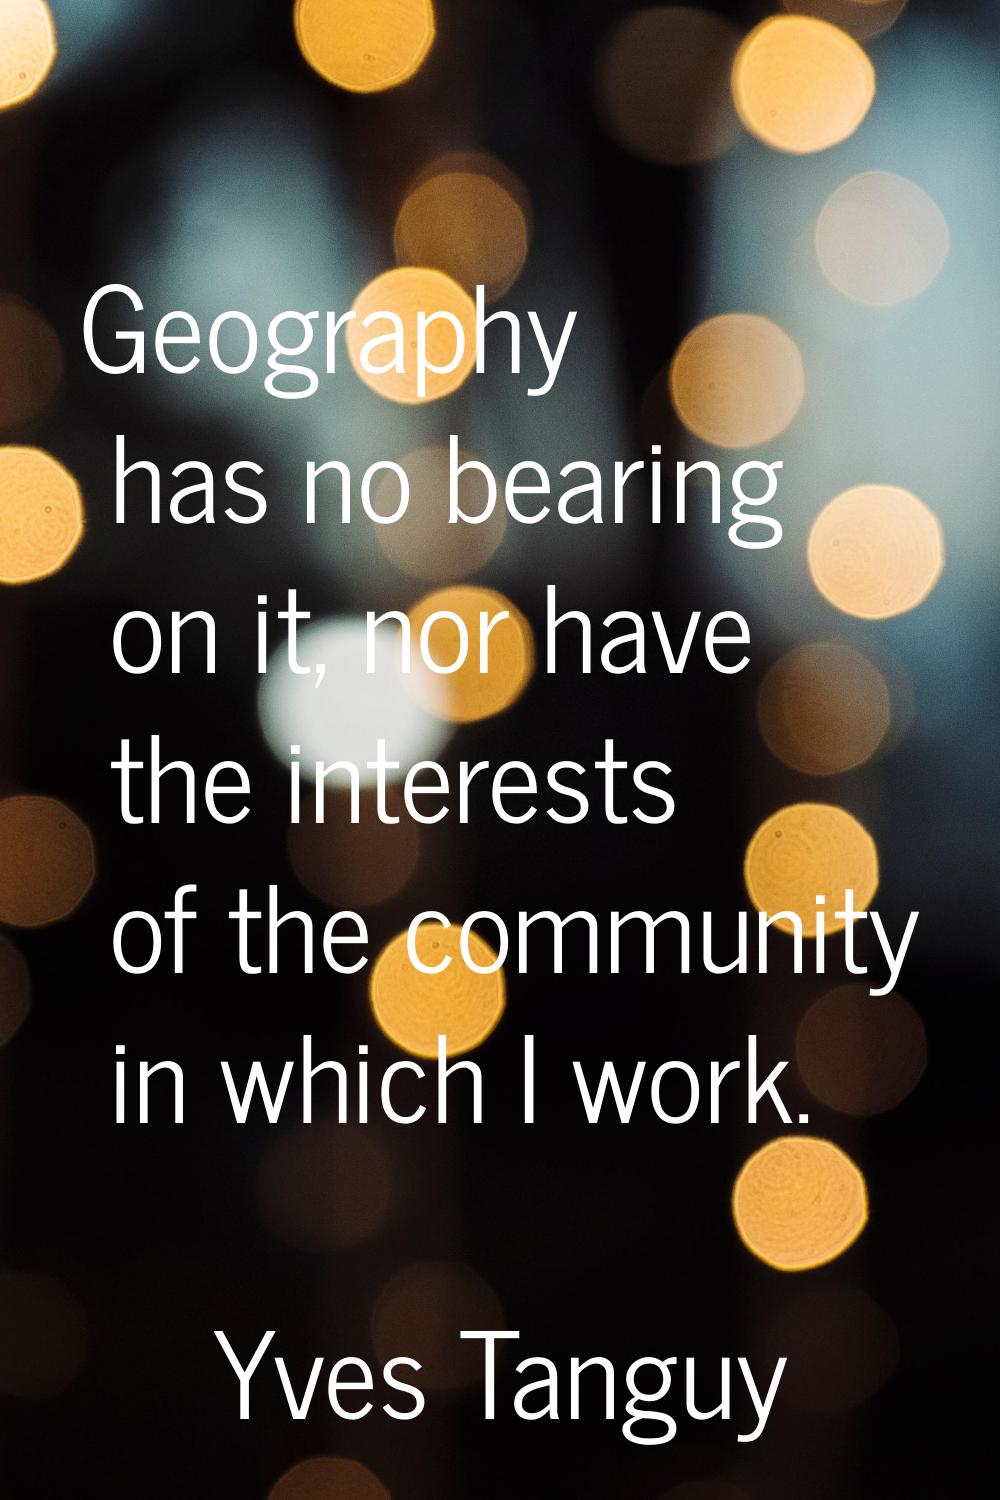 Geography has no bearing on it, nor have the interests of the community in which I work.